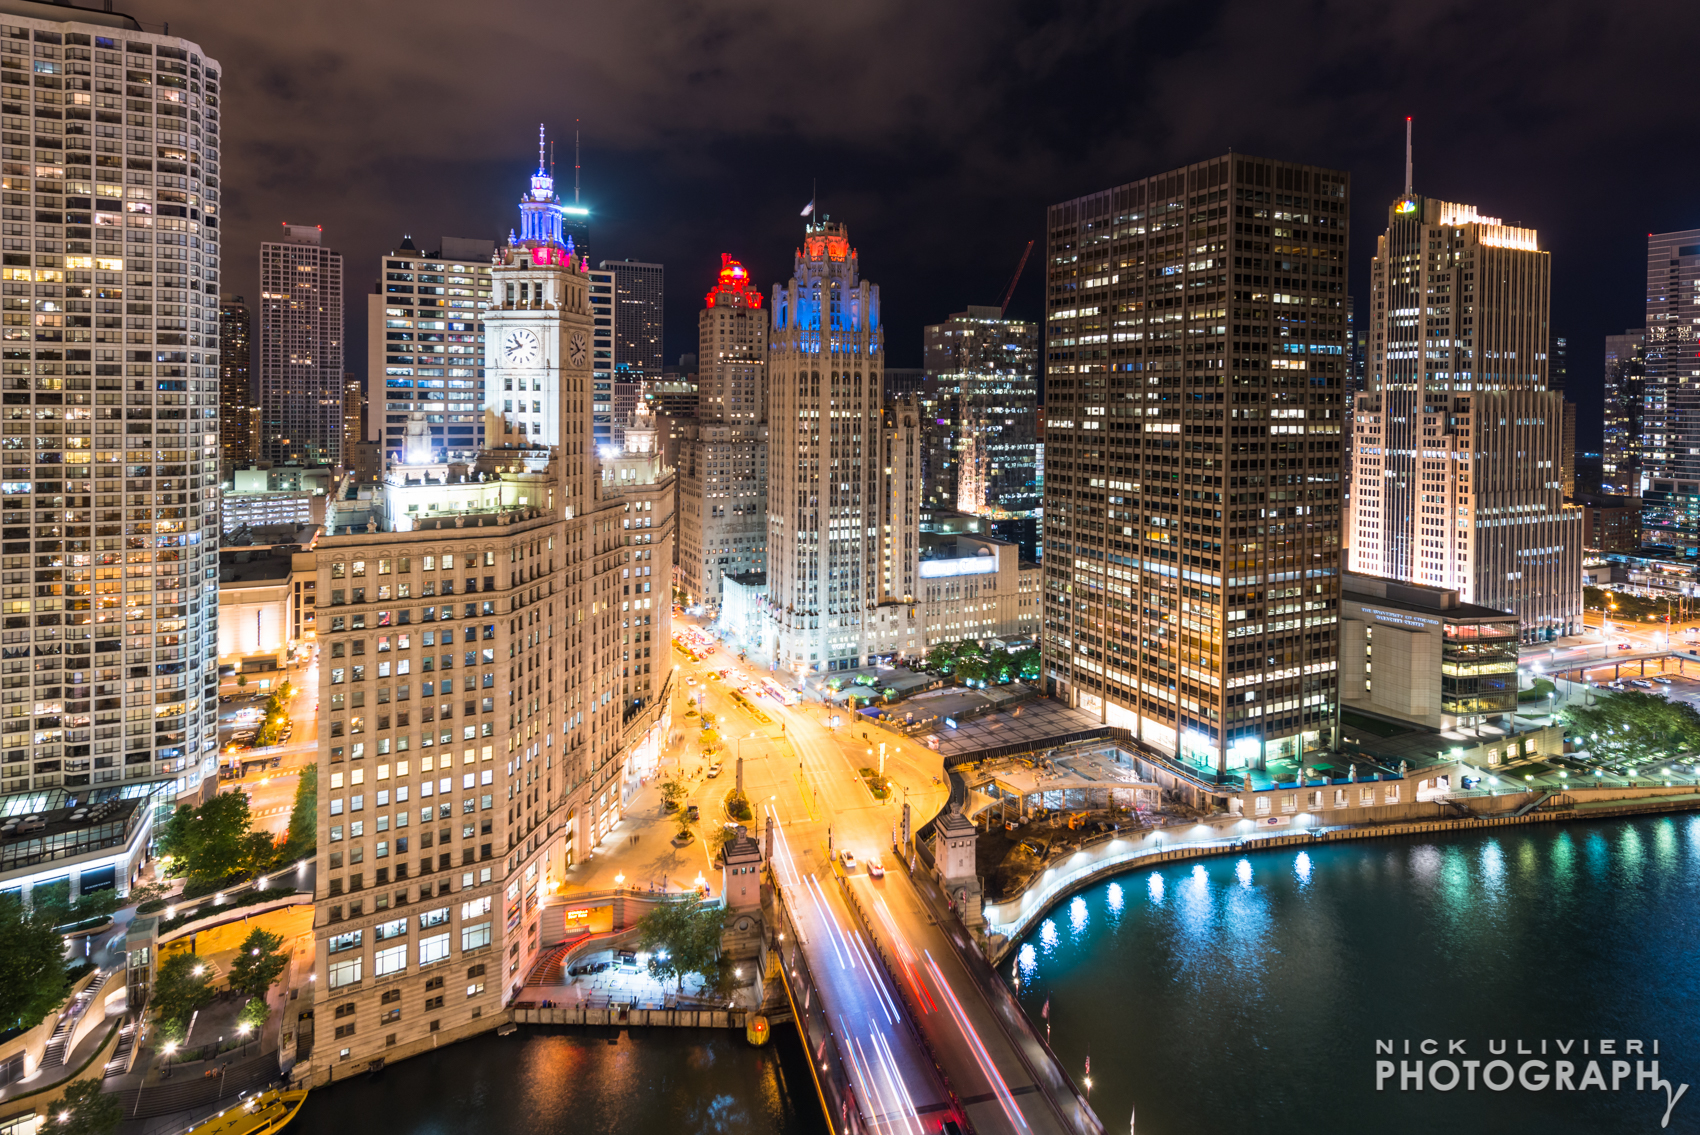 Michigan Ave & the Chicago River